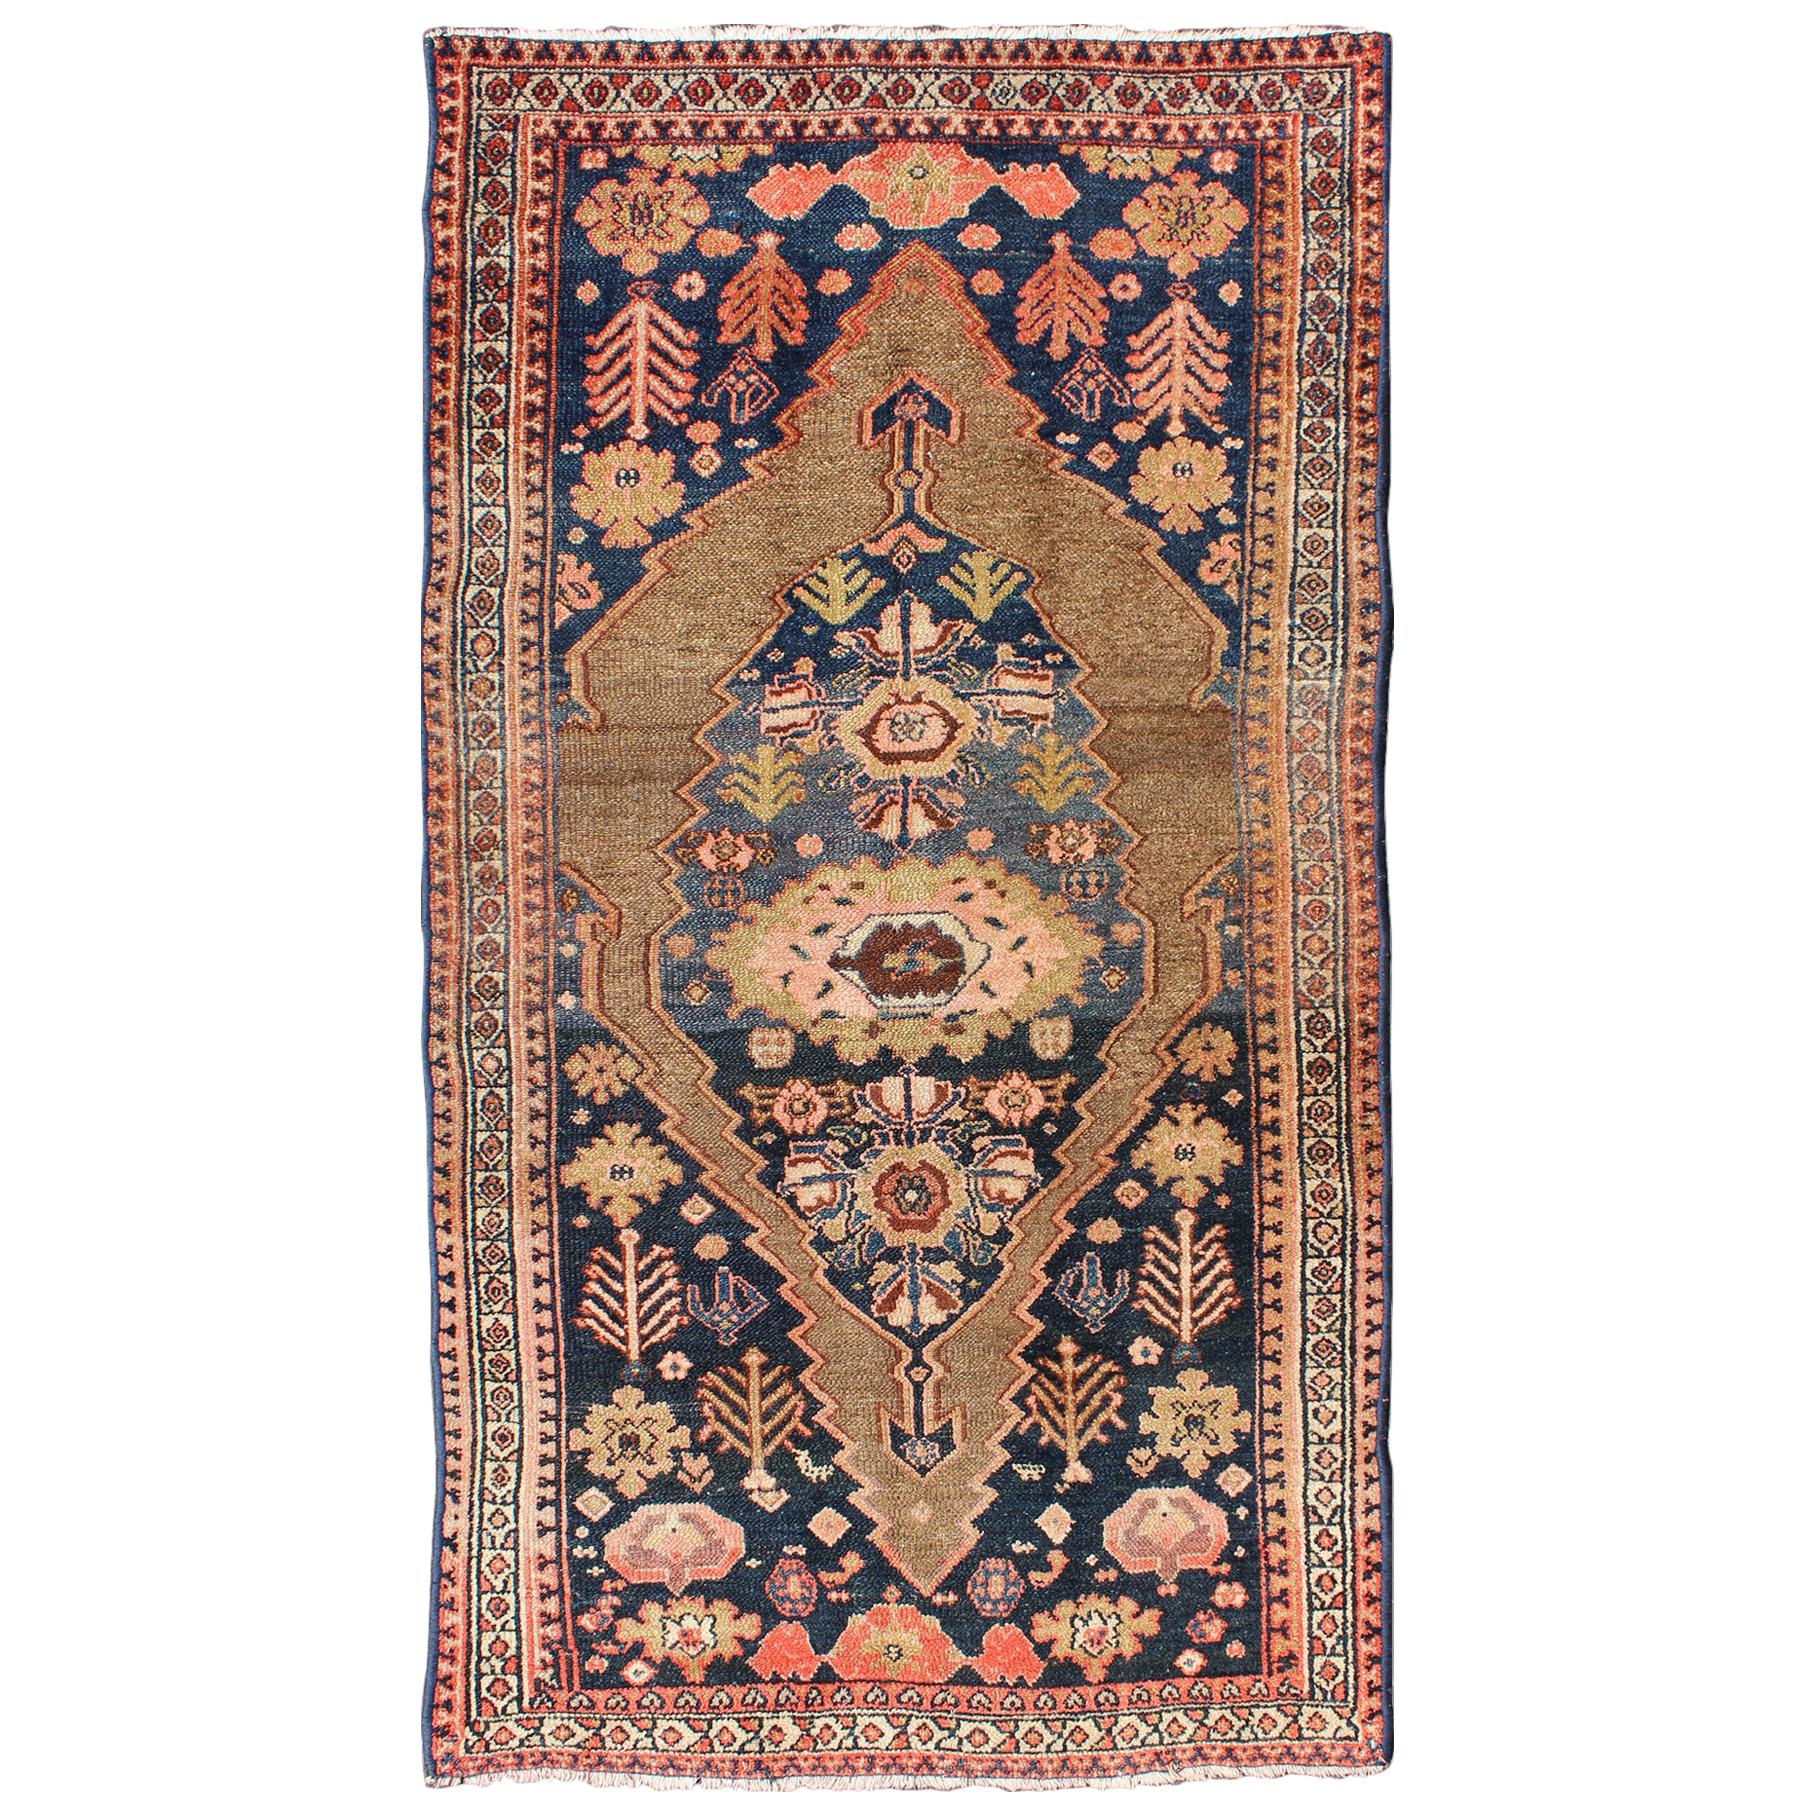 Tribal Medallion Design Antique Persian Serab Rug in Camel and Shades of Blue For Sale